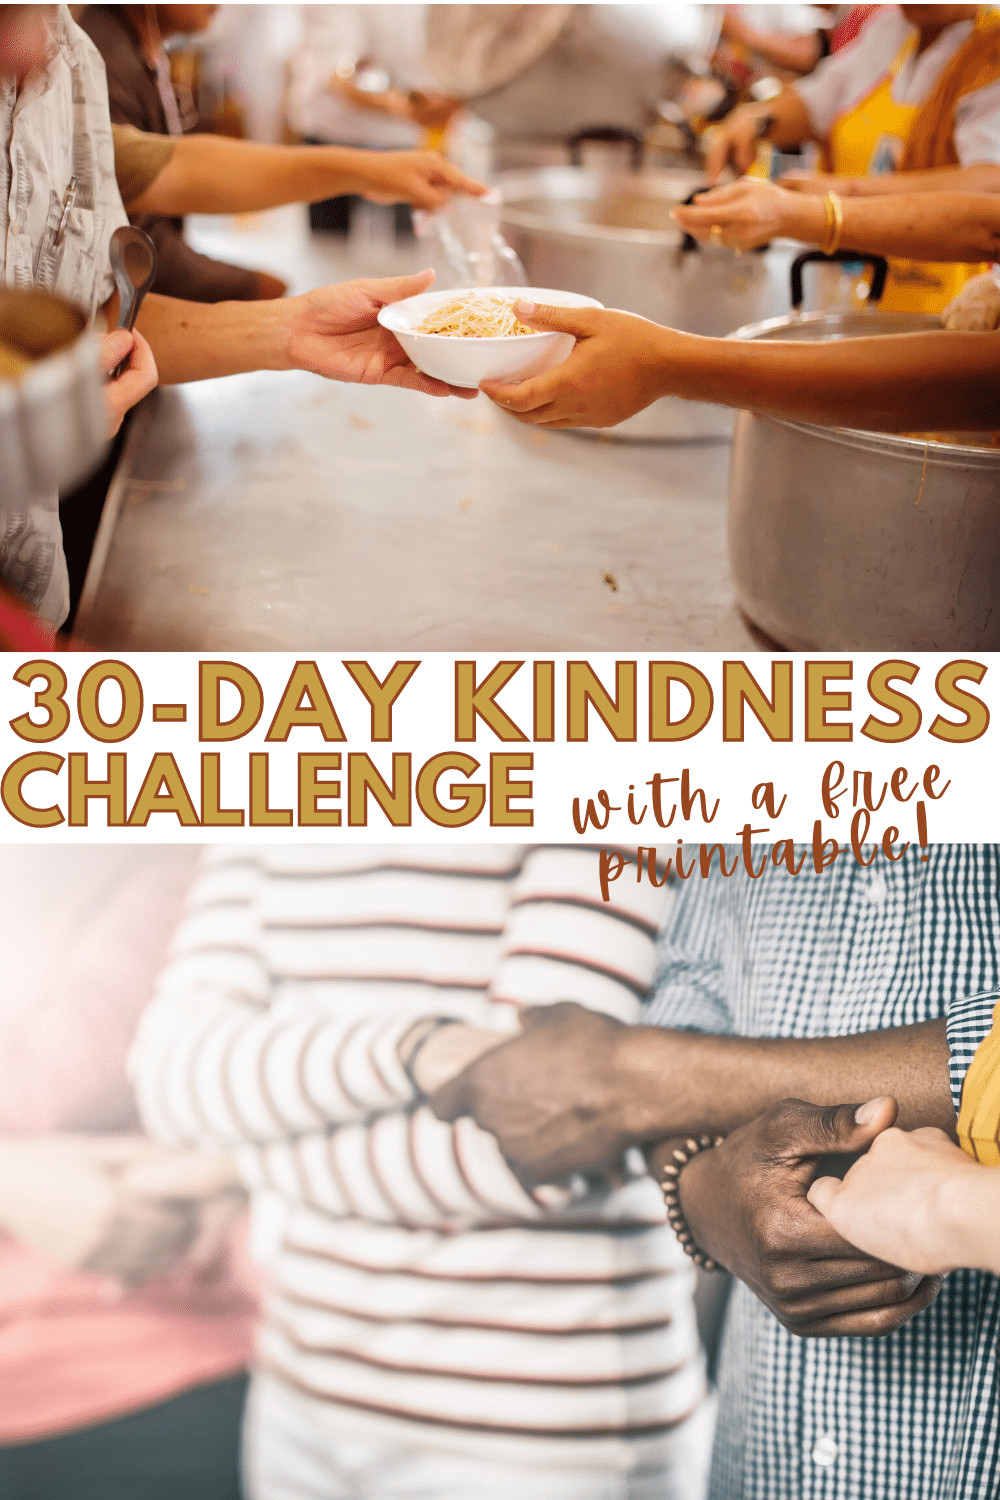 This easy 30 Day Kindness Challenge comes with a free printable to help make it simple to remember to do your random act of kindness every day. #kindness #30daychallenge #printables via @wondermomwannab